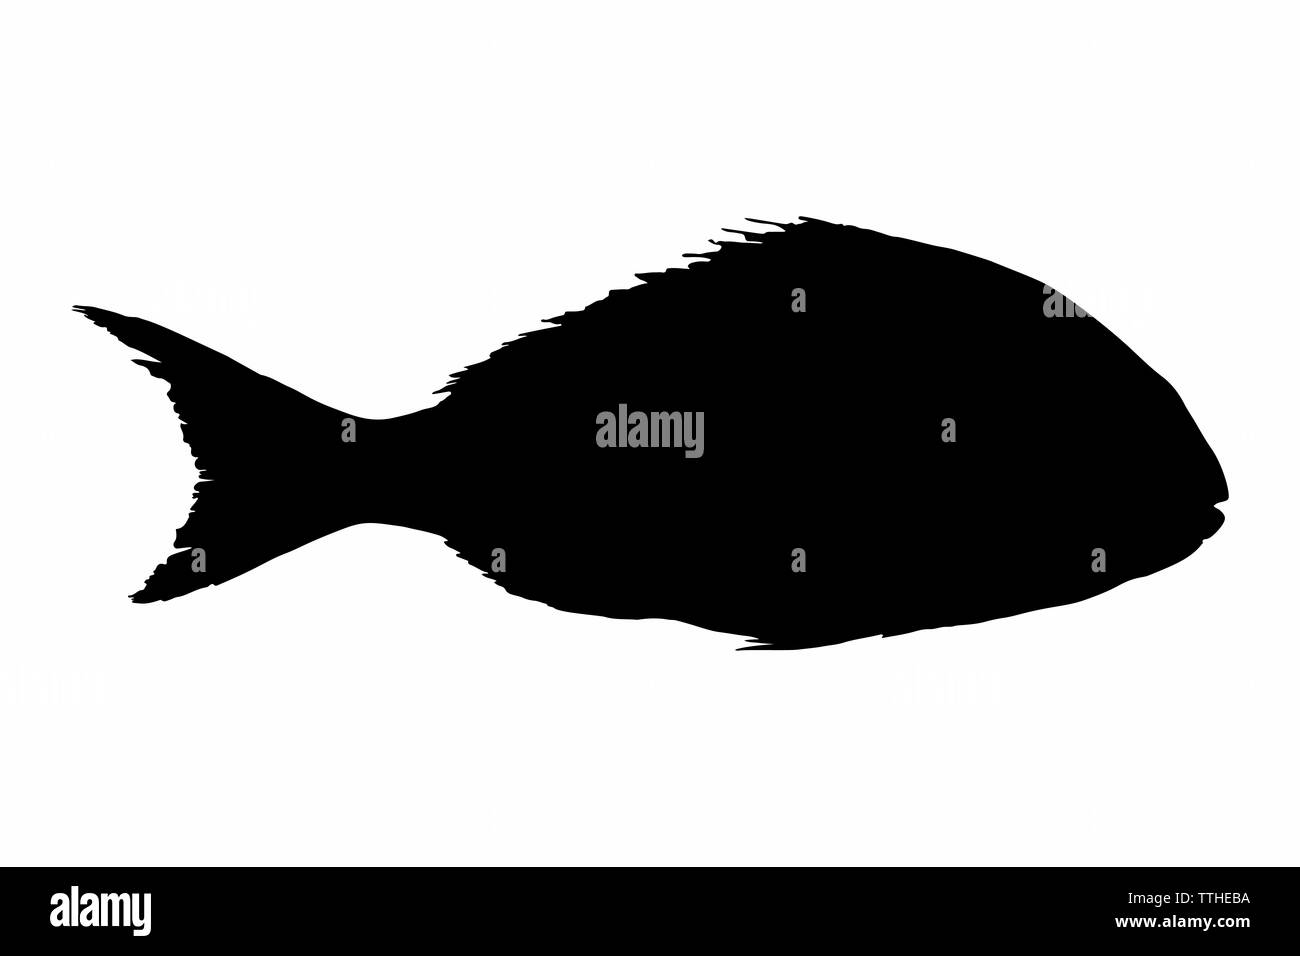 fish icon silhouette isolated on white background Stock Photo